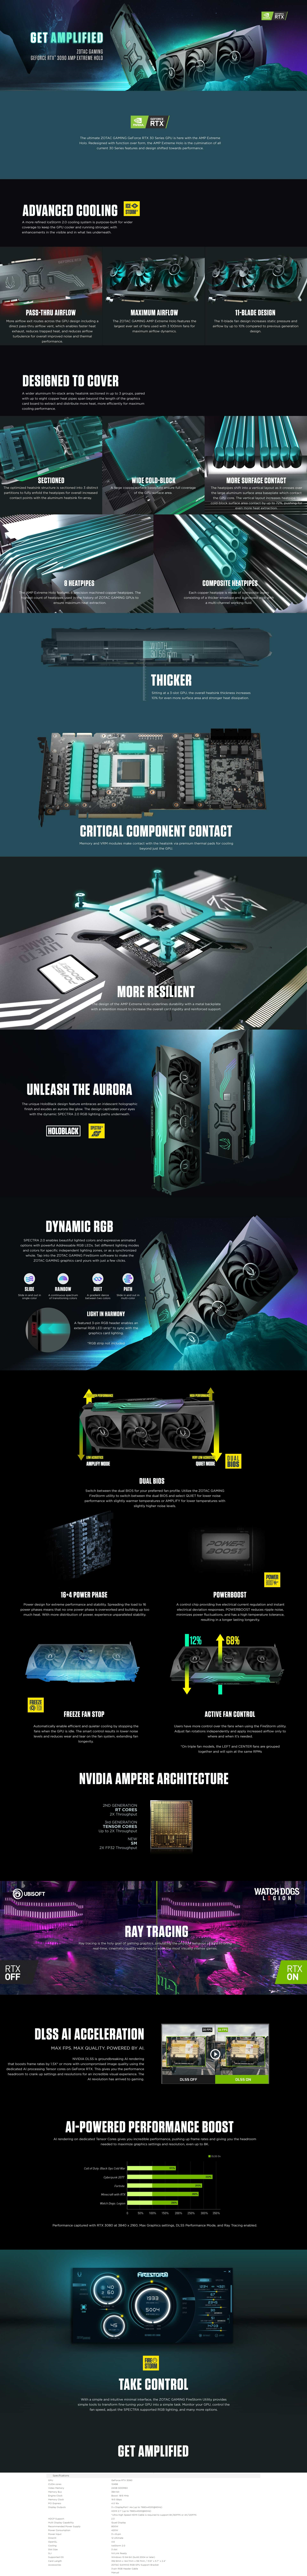 A large marketing image providing additional information about the product ZOTAC GAMING GeForce RTX 3090 AMP Extreme Holo 24GB GDDR6X - Additional alt info not provided